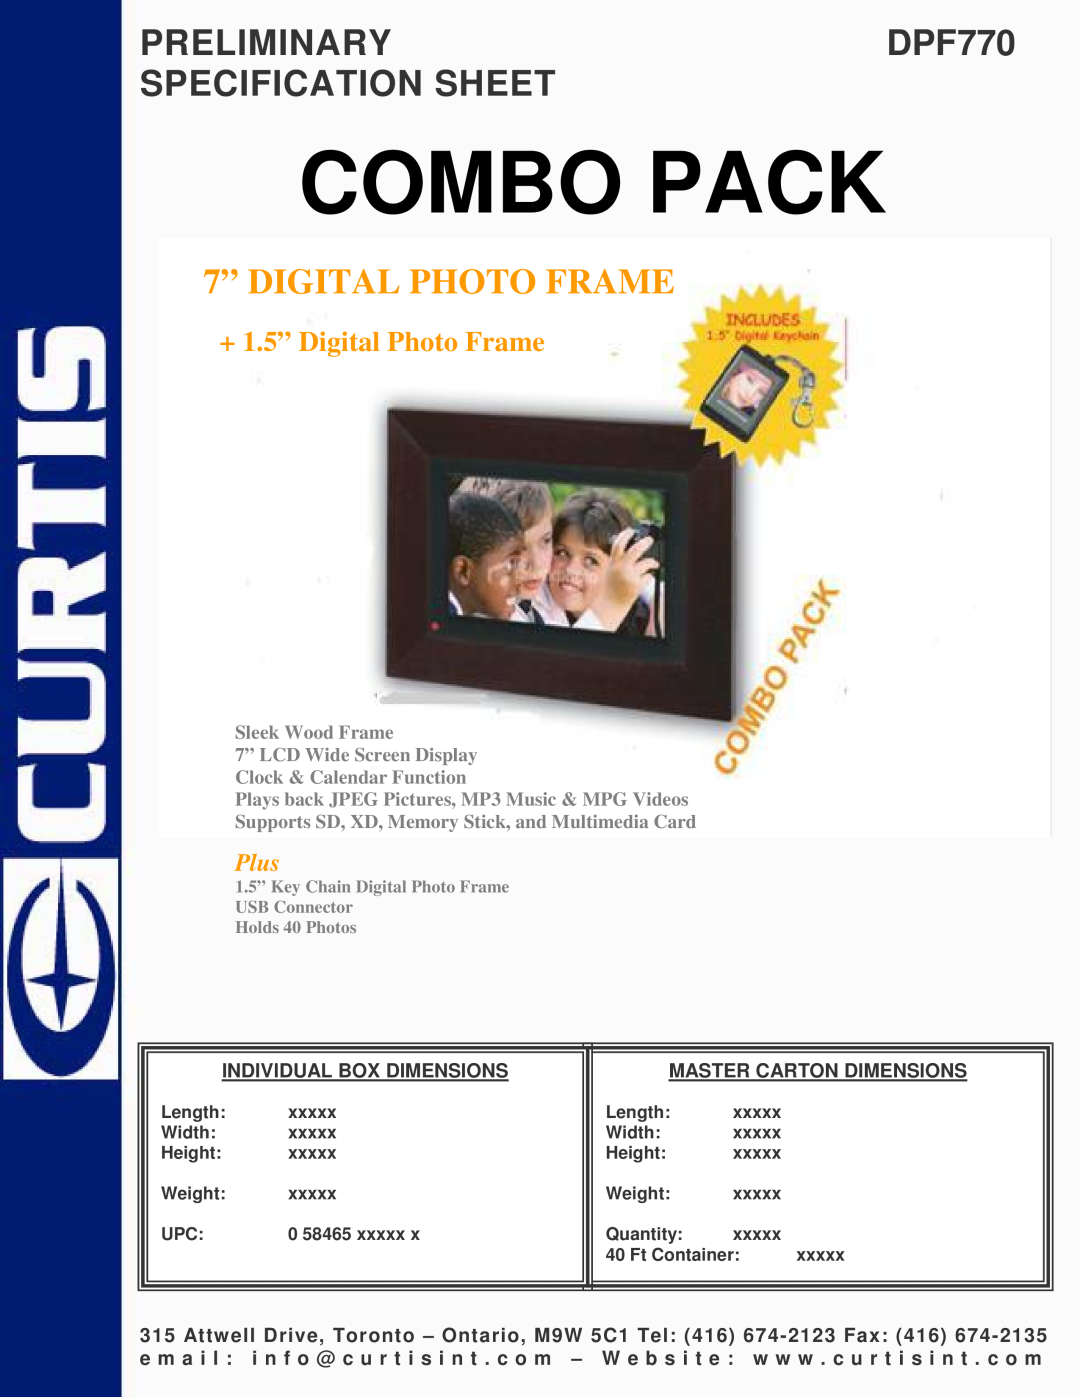 Curtis dimensions Combo Pack, PRELIMINARYDPF770 SPECIFICATION SHEET, 7” DIGITAL PHOTO FRAME, + 1.5” Digital Photo Frame 